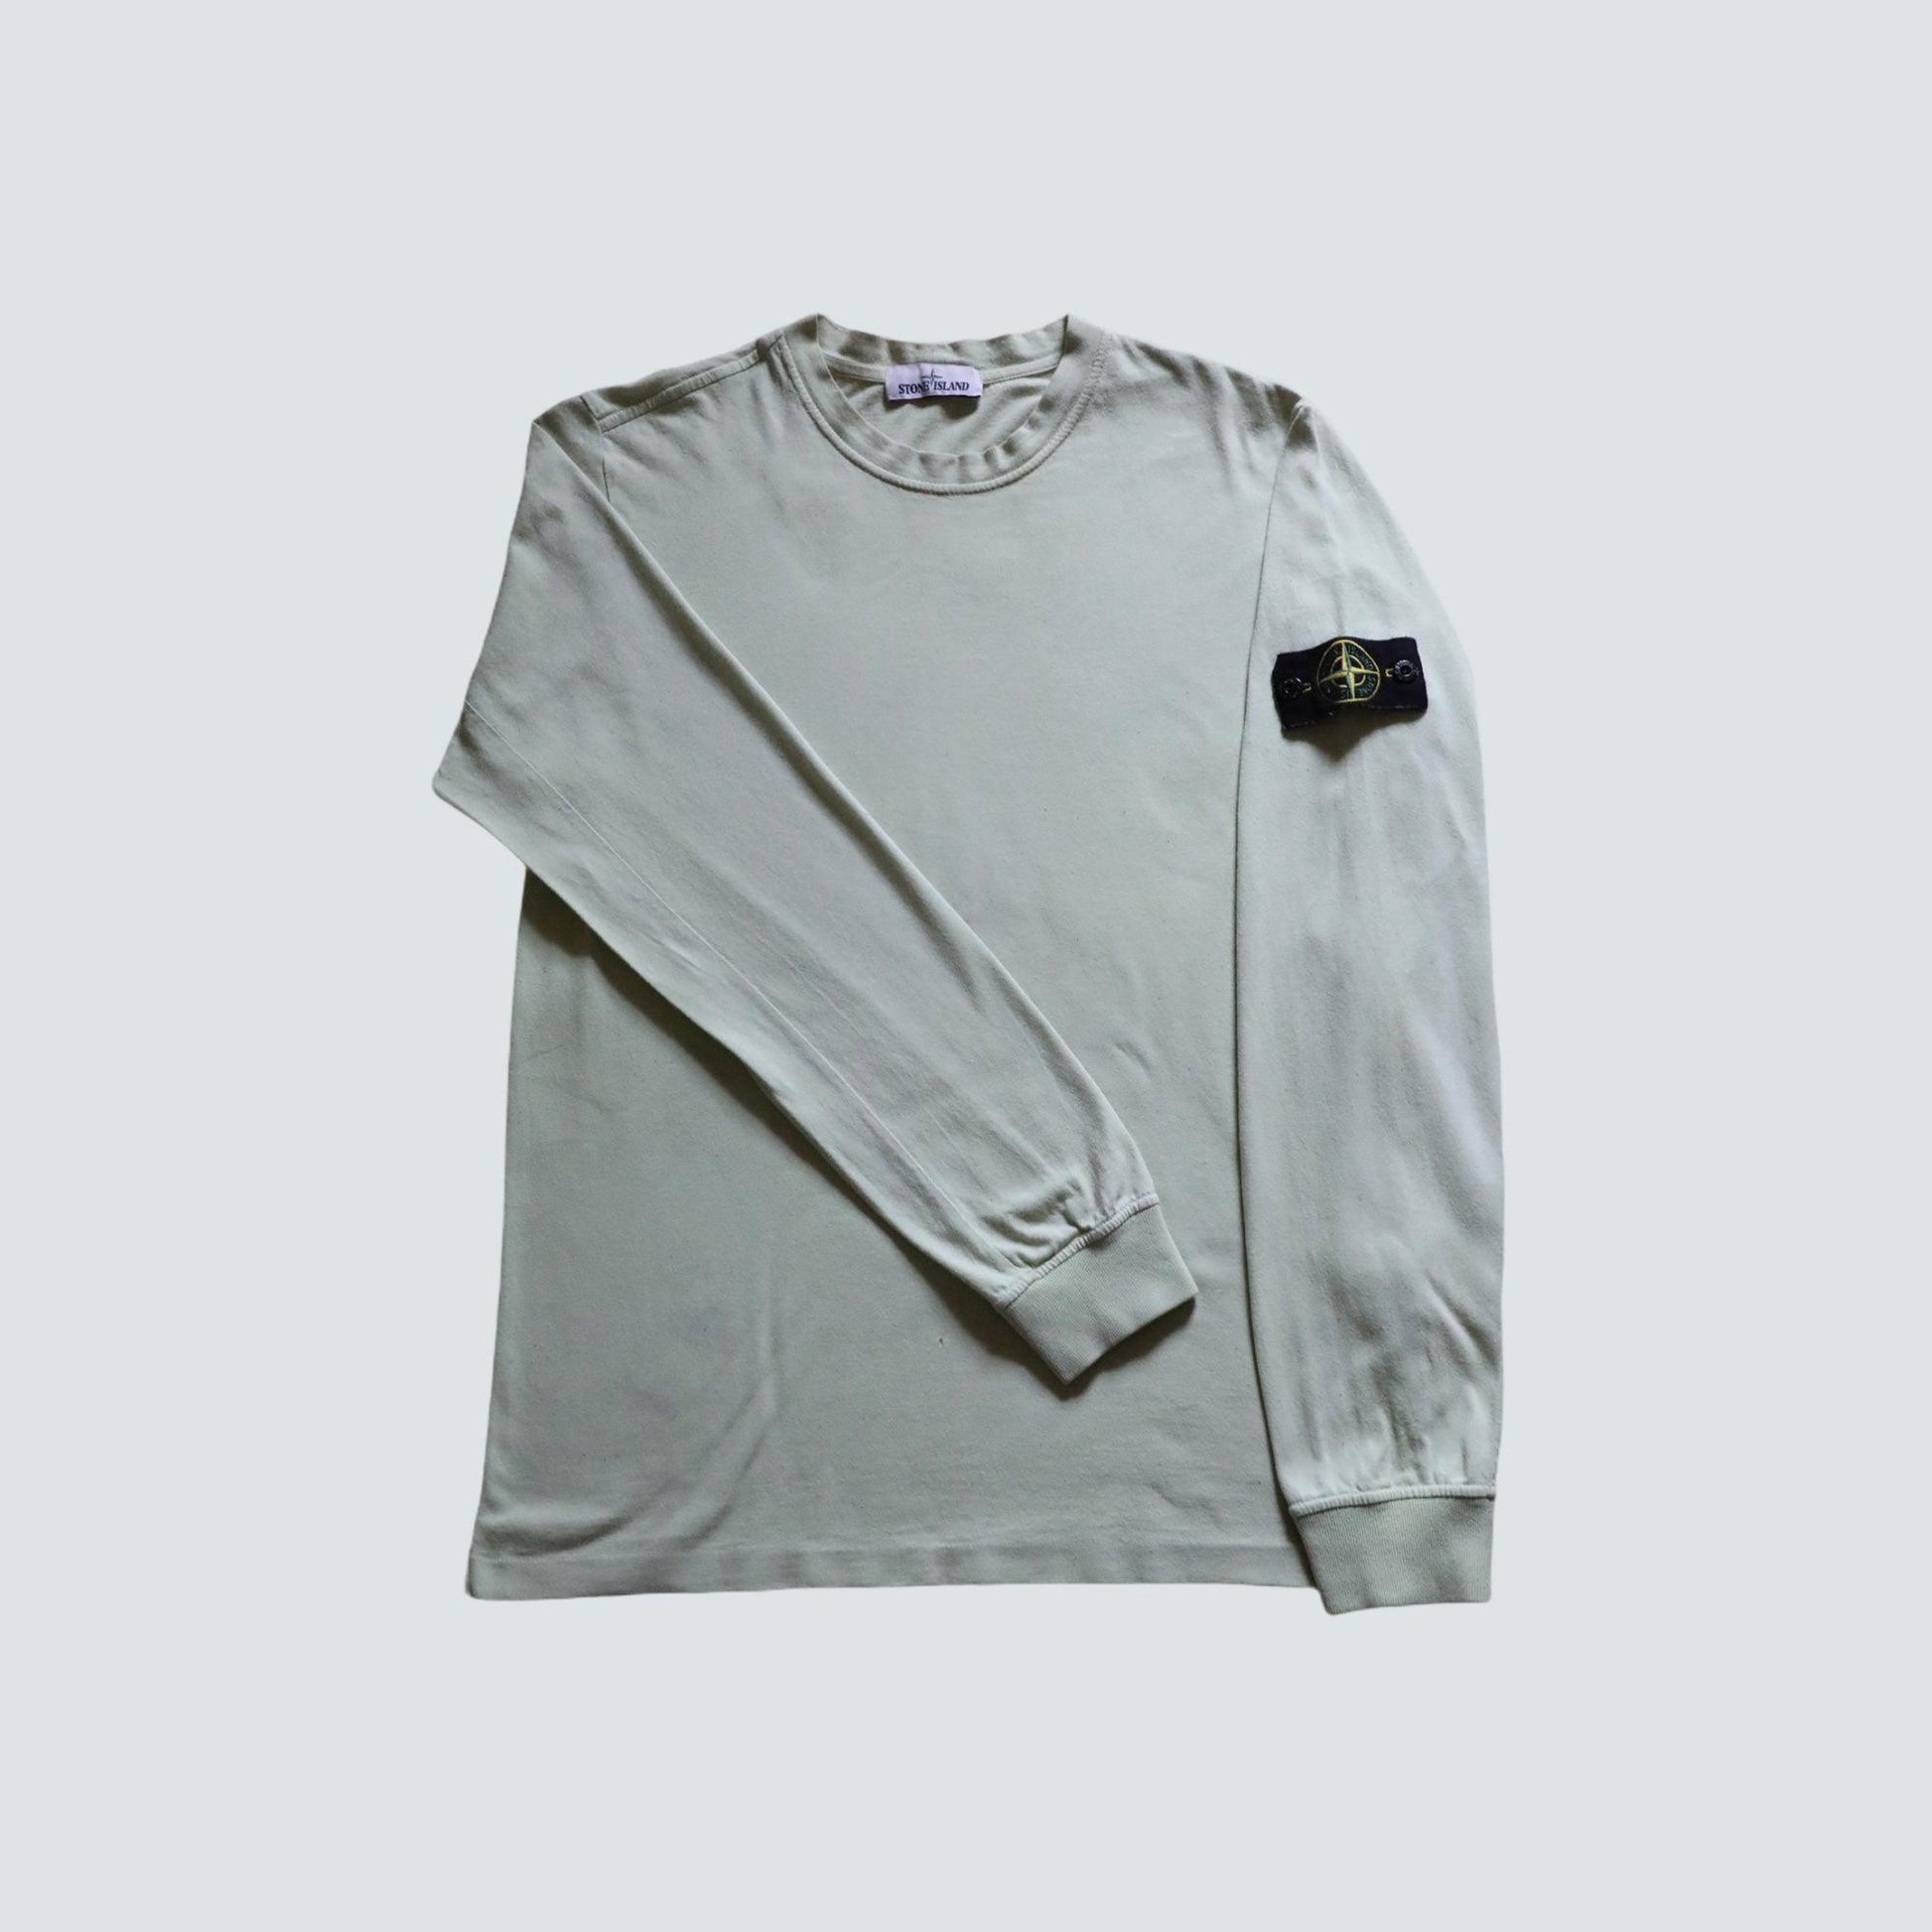 Stone island Long sleeve top in light green (M) - Known Source